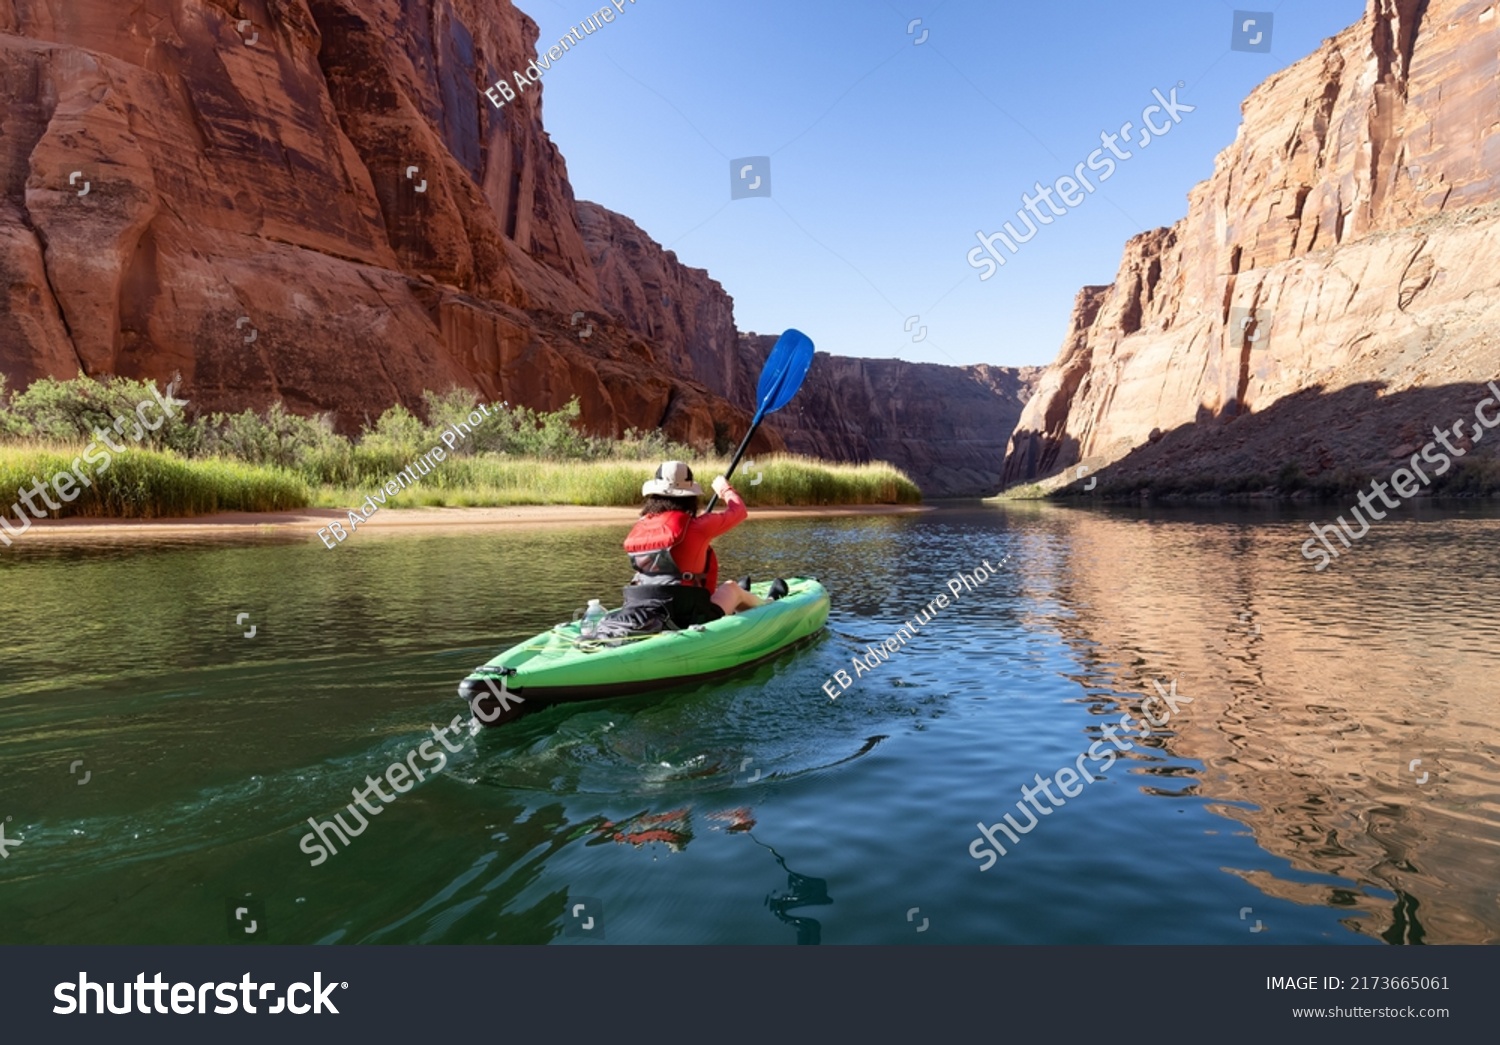 Adventurous Woman on a Kayak paddling in Colorado River. Glen Canyon, Arizona, United States of America. American Mountain Nature Landscape Background. Adventure Travel #2173665061